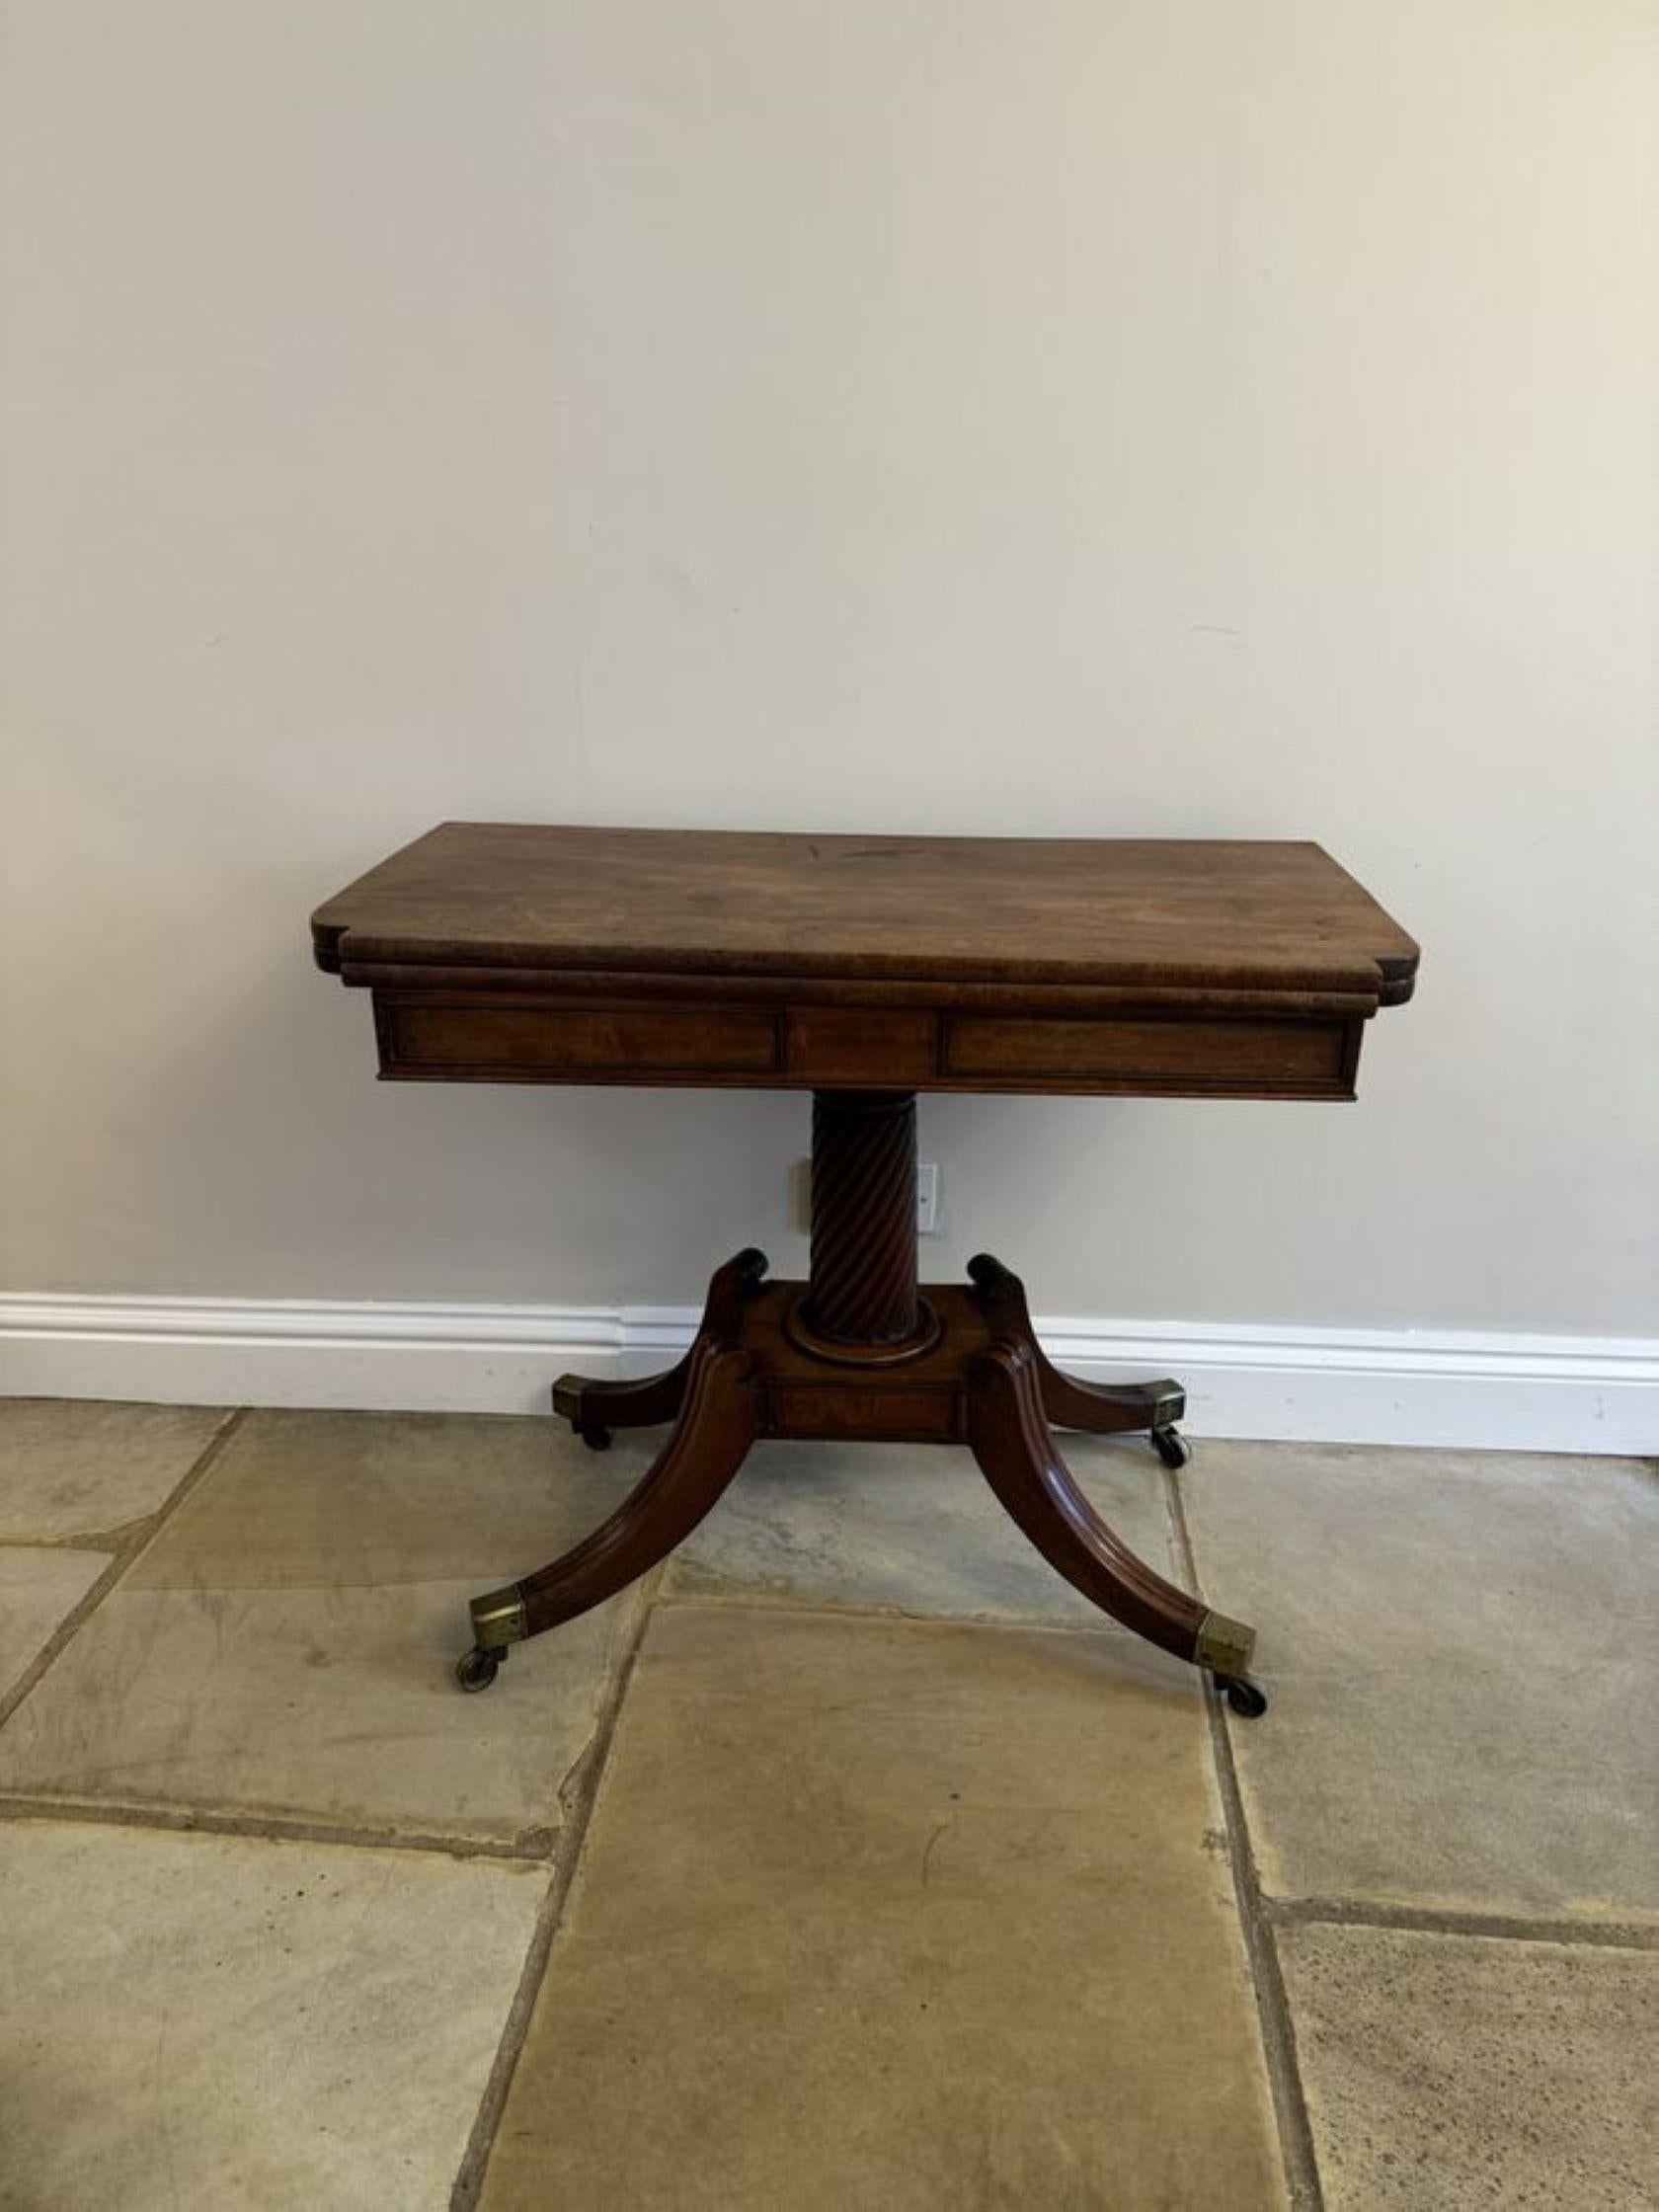 Fine quality antique regency mahogany tea table, having a quality mahogany shaped swizzle top opening to reveal a polished interior, mahogany frieze supported by a rope twist mahogany pedestal column standing on a platform base with four reeded